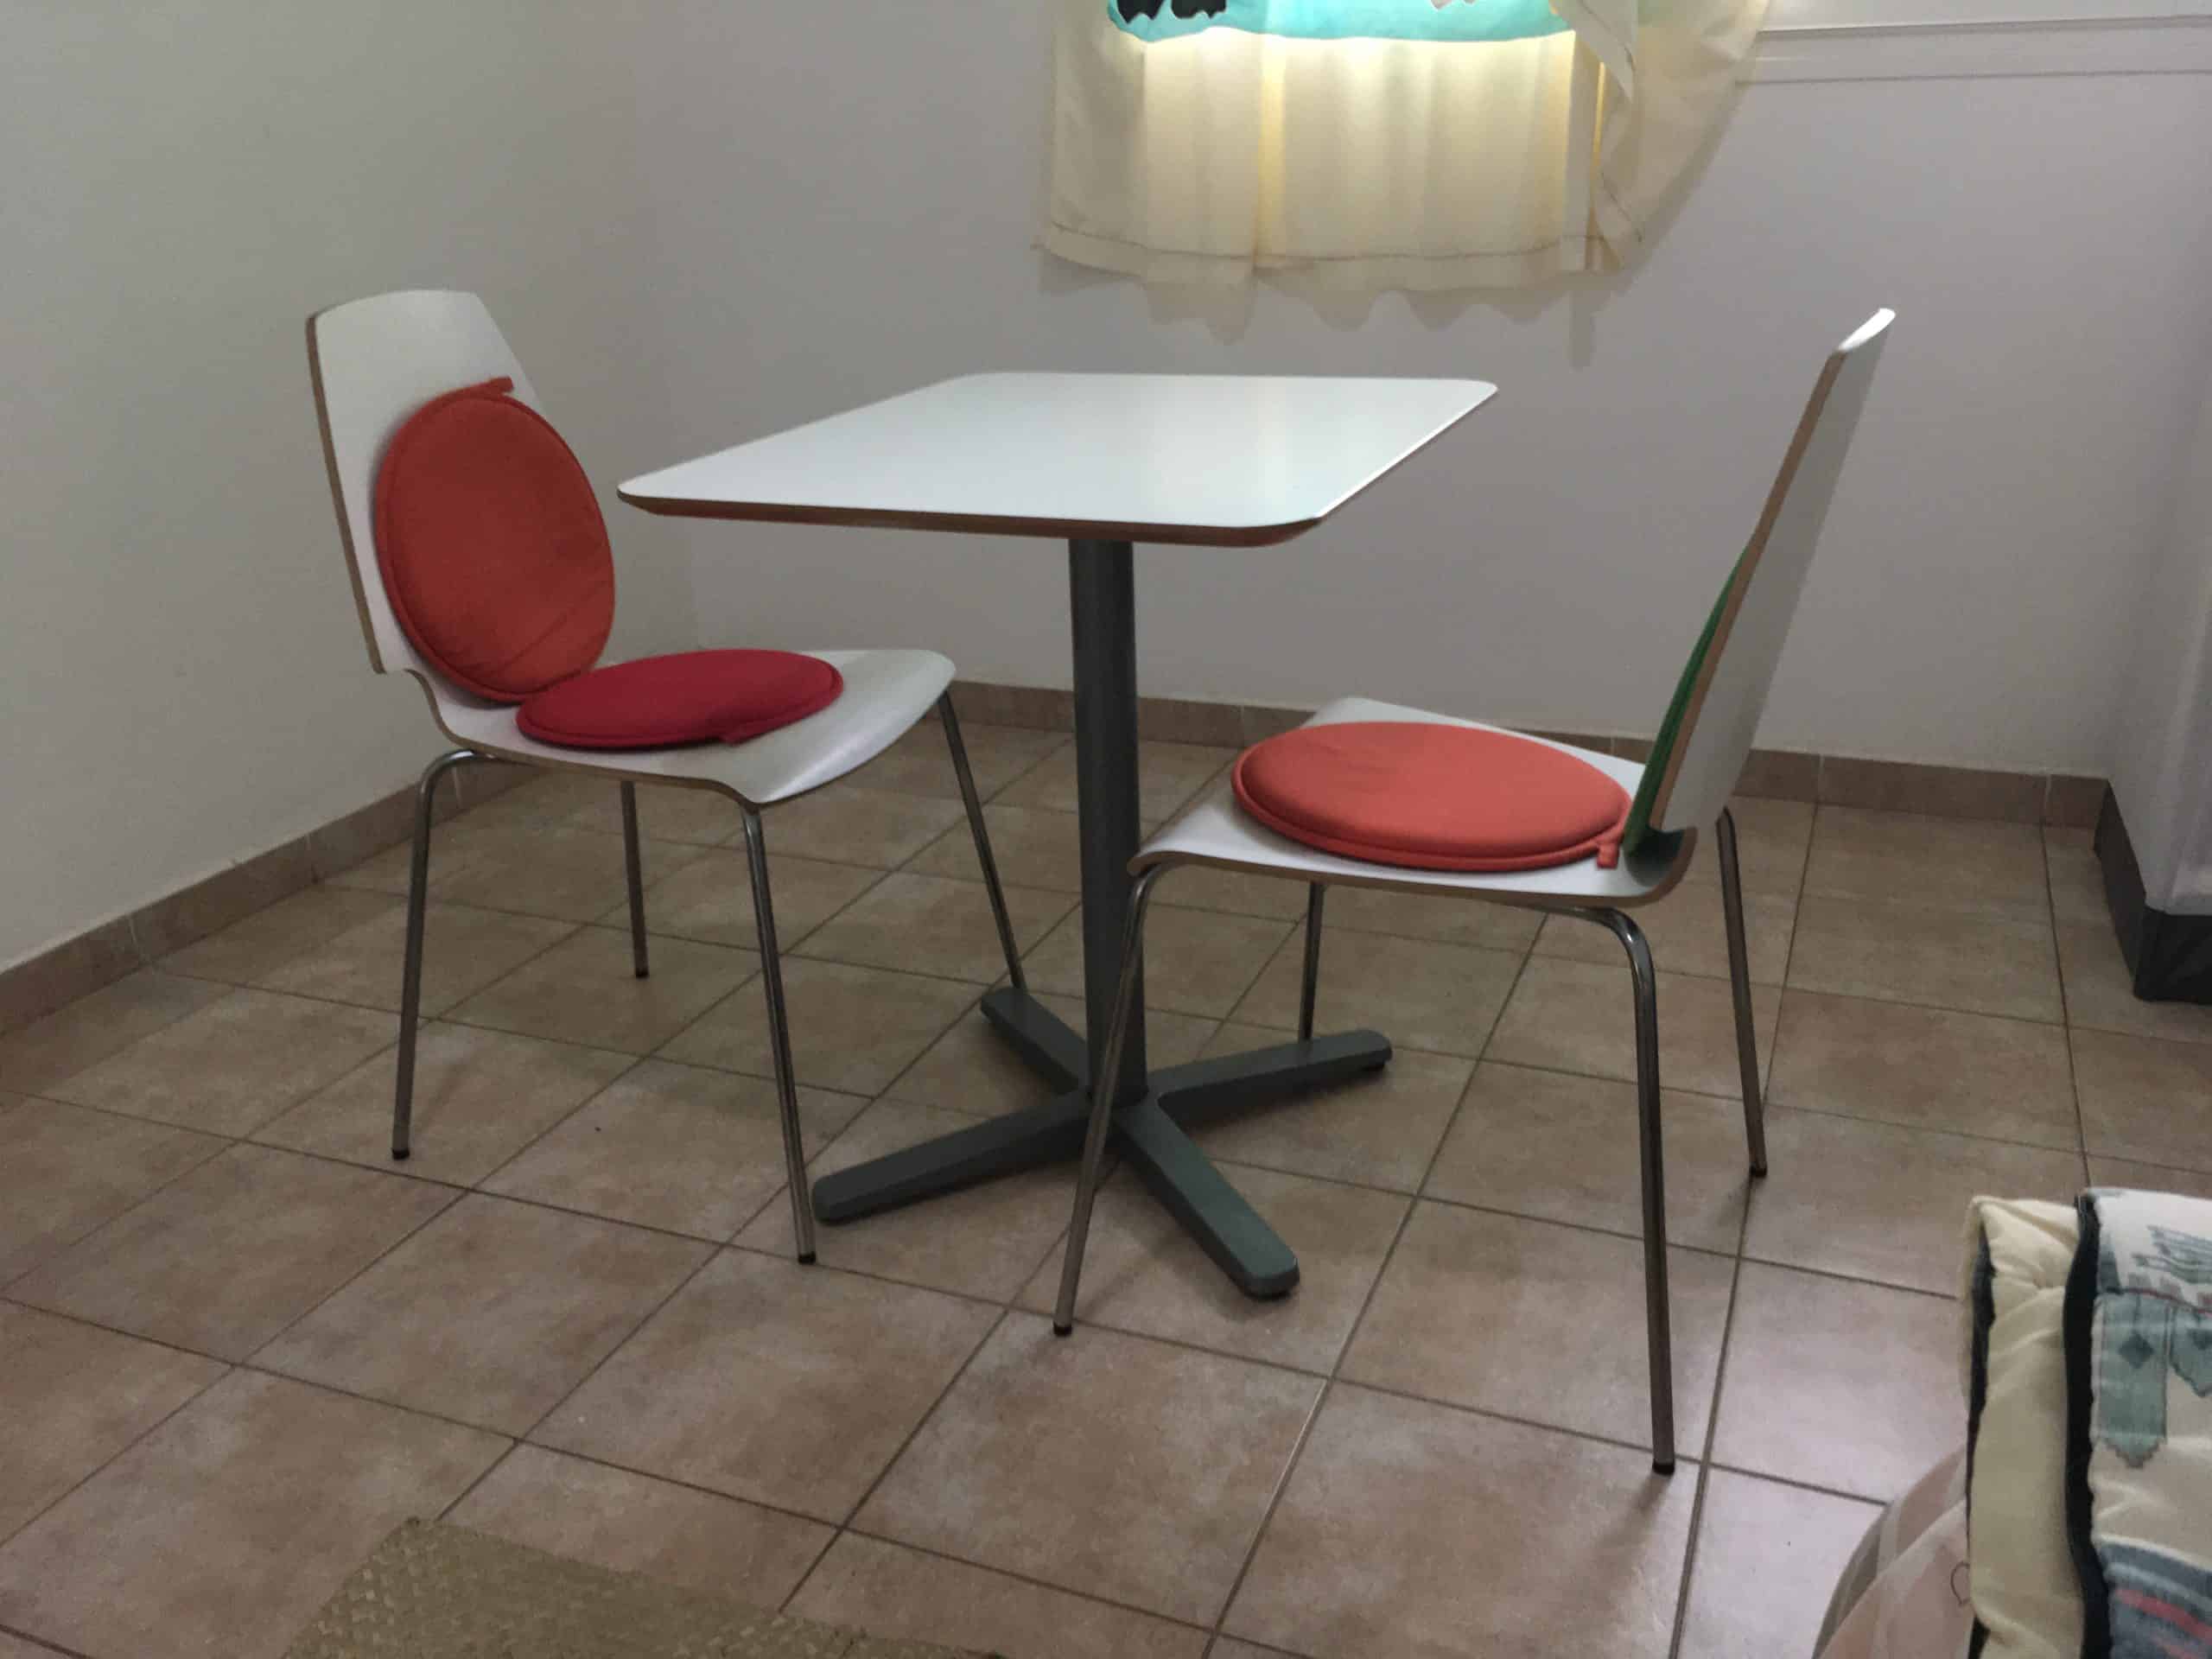 Vends Table d’appoint rectangulaire + 2 chaises assorties